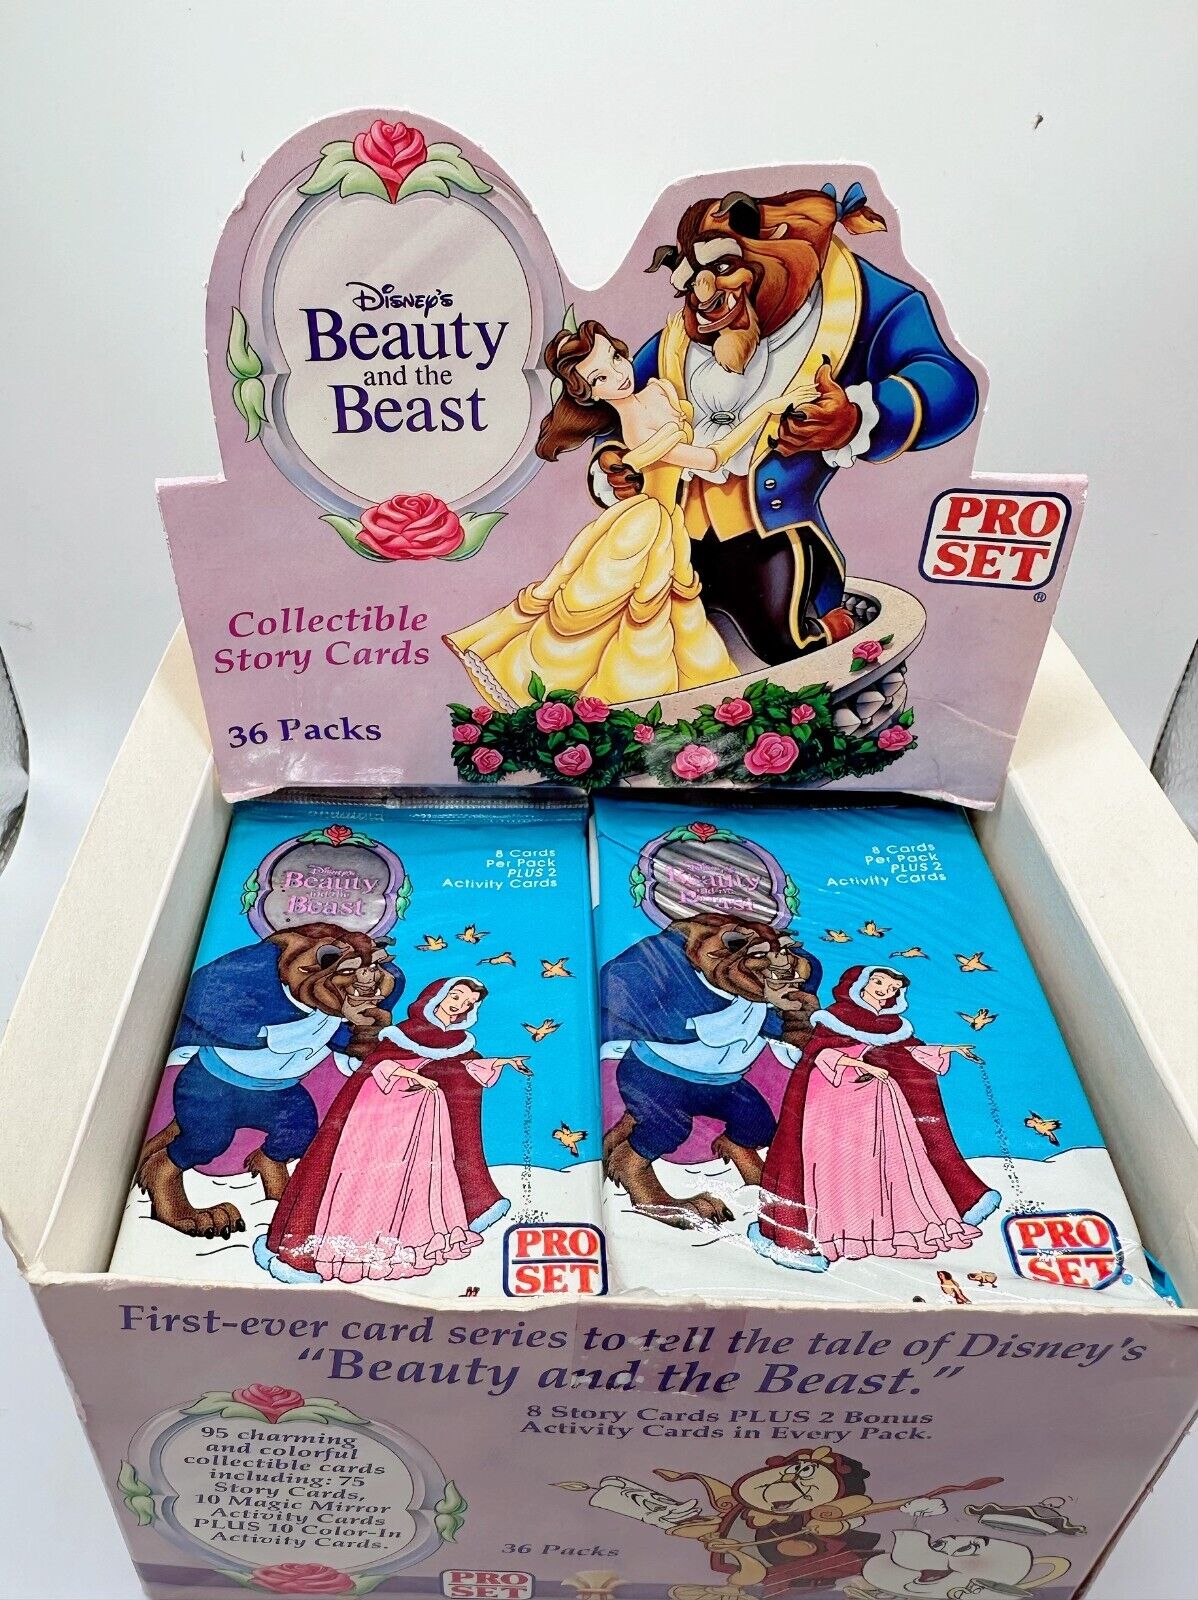 1992 Pro Set Disney's Beauty and the Beast Story Cards - Lot 31 Sealed Packs